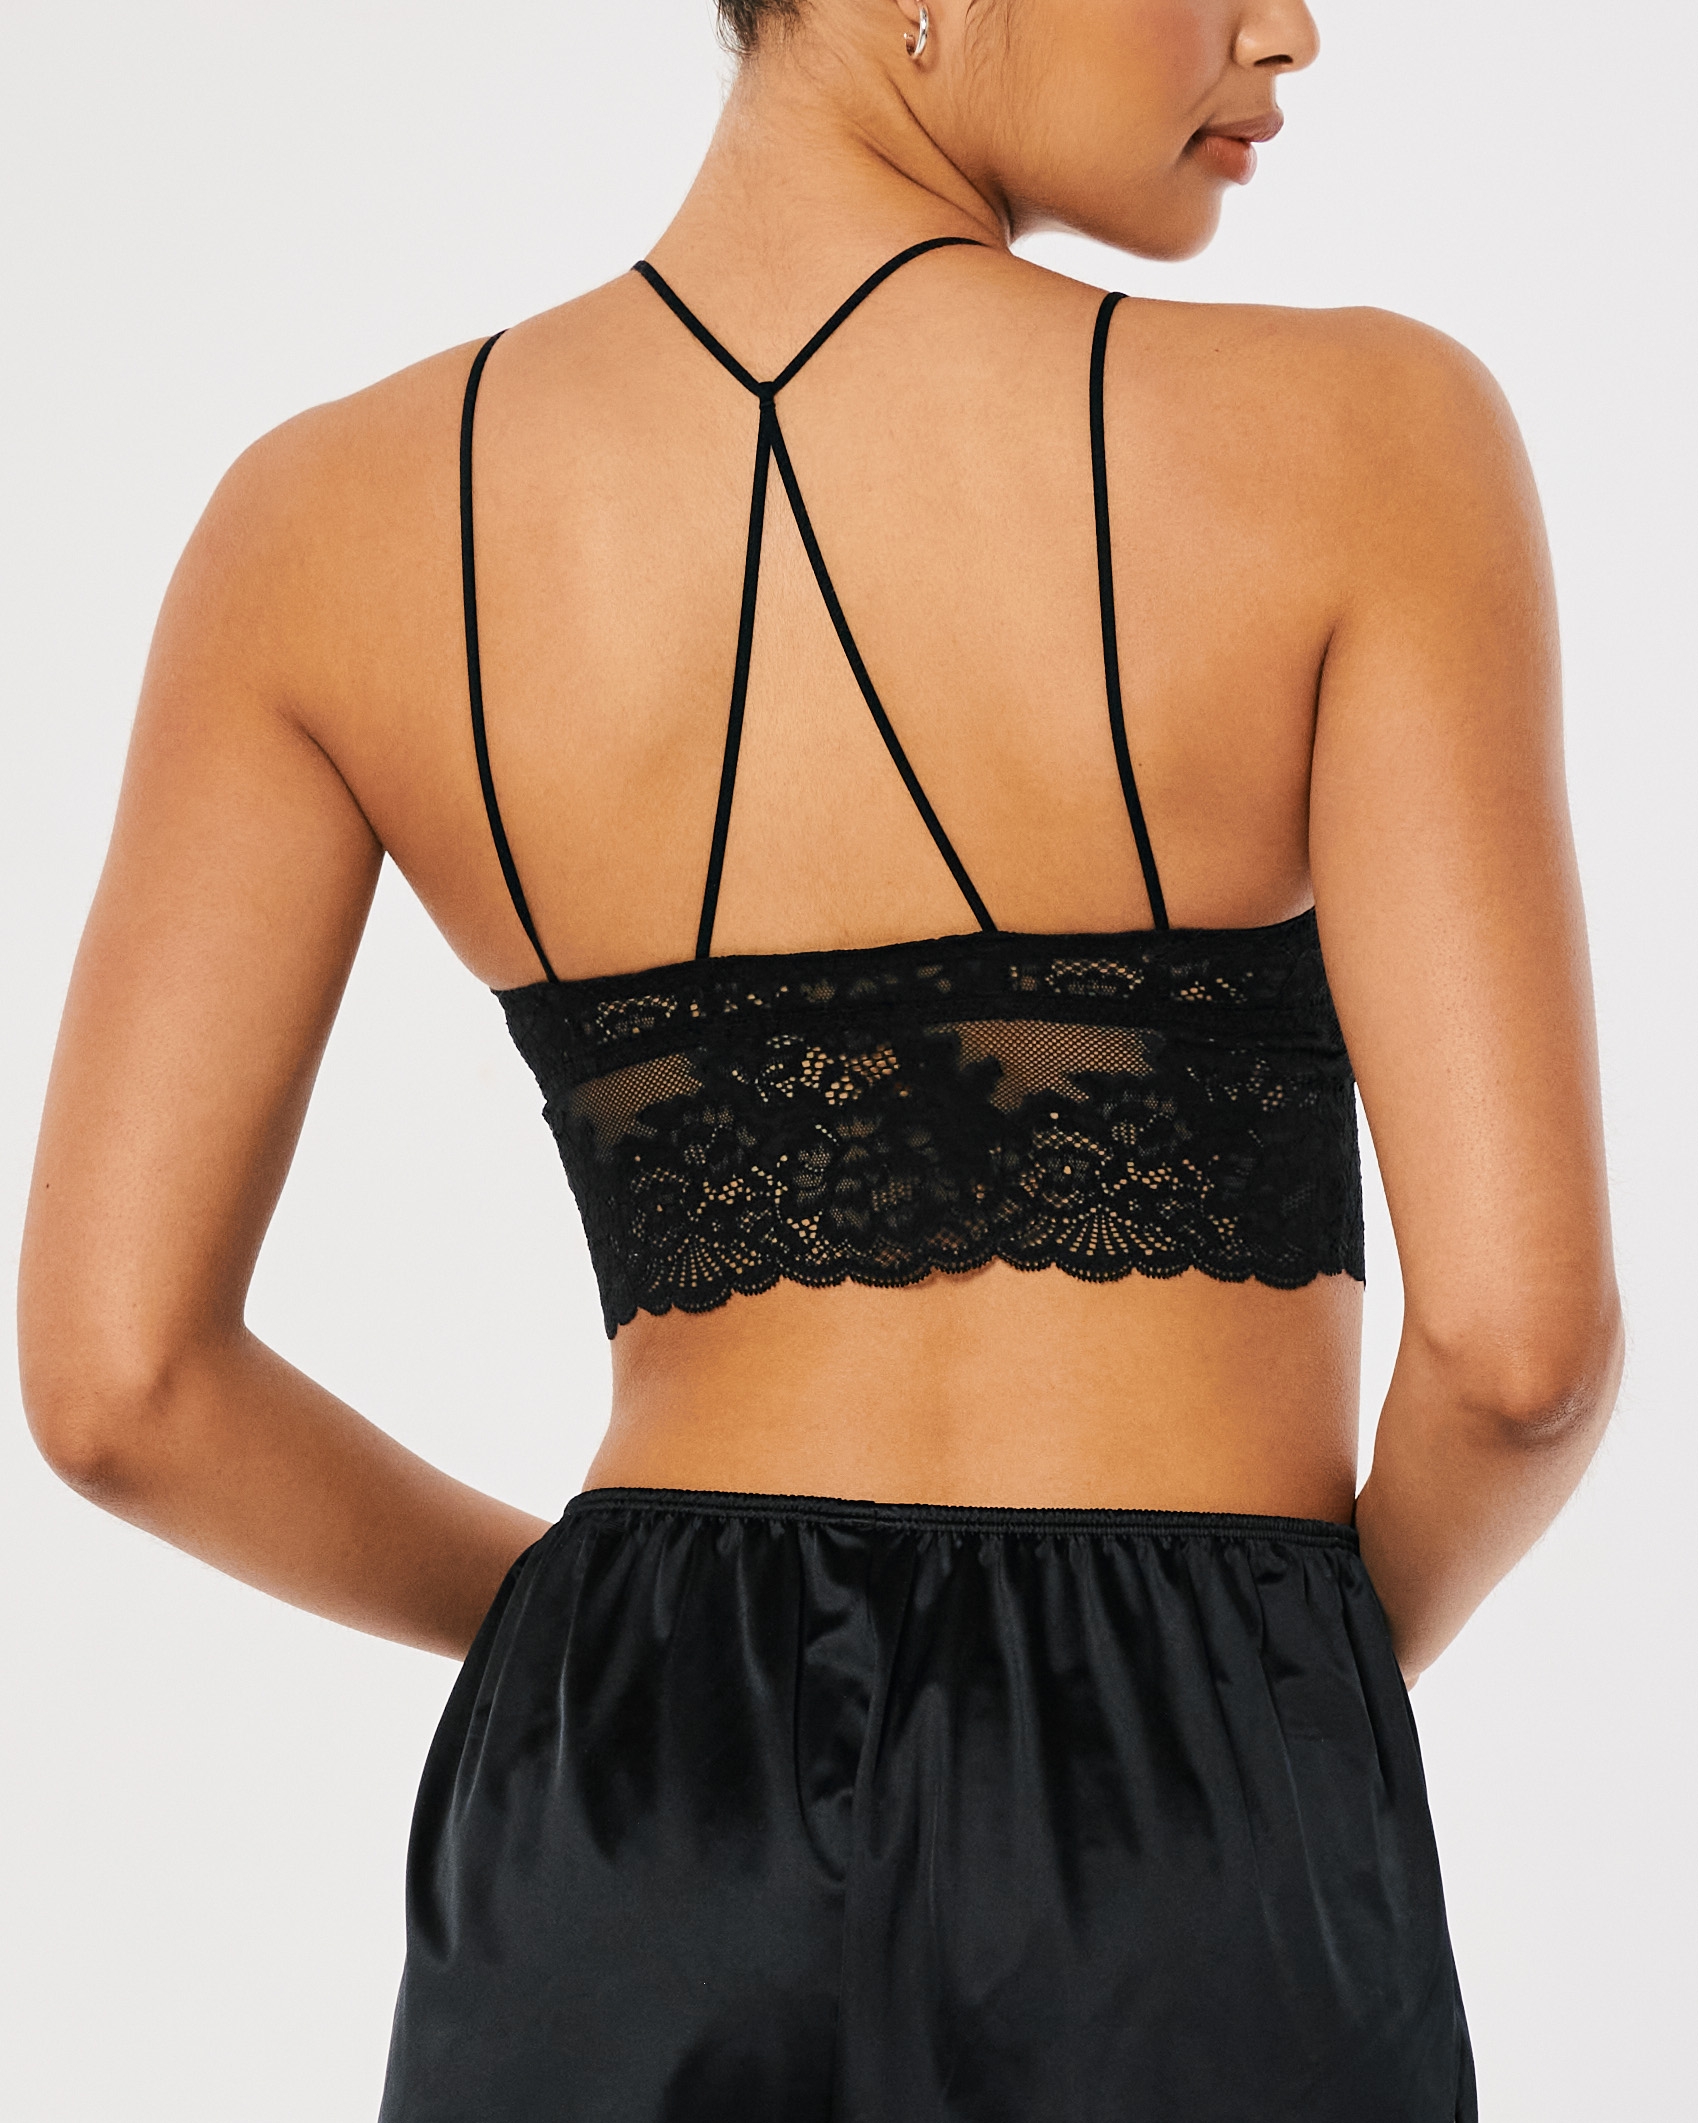 Gilly Hicks Lace Halter Bralette With Removable Pads